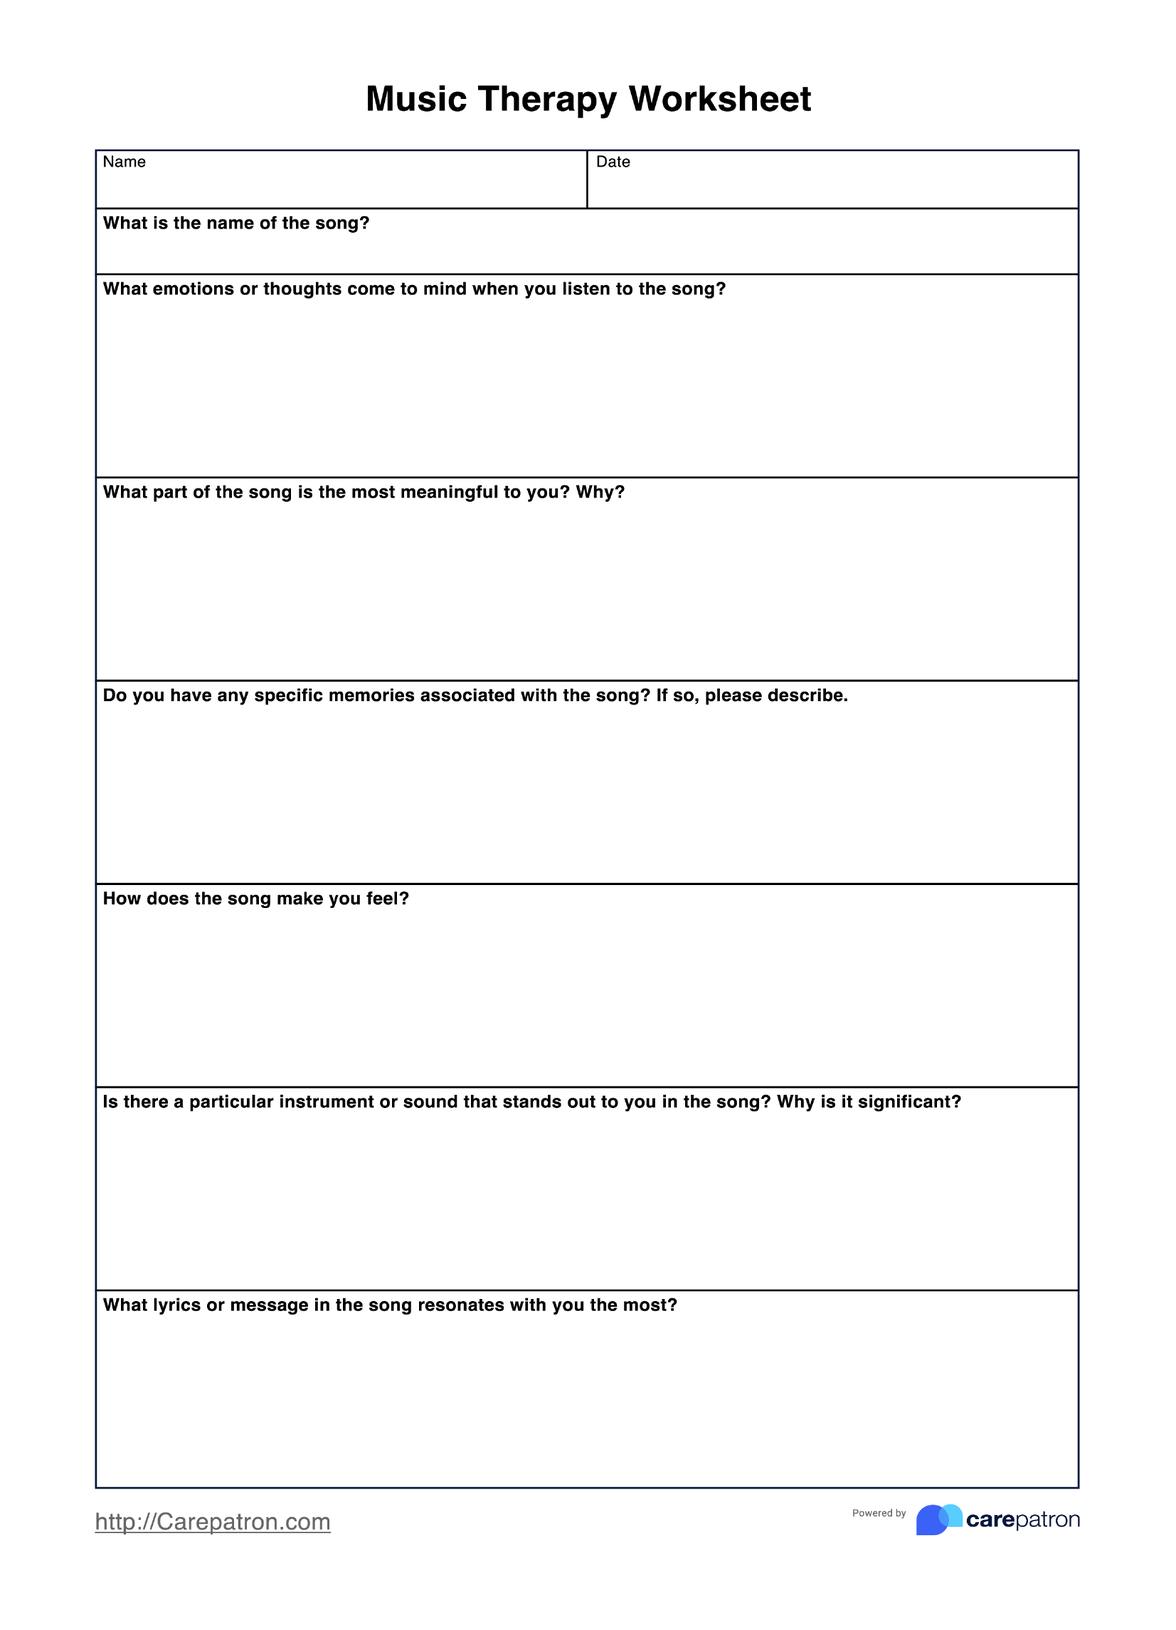 Music Therapy Worksheets PDF Example